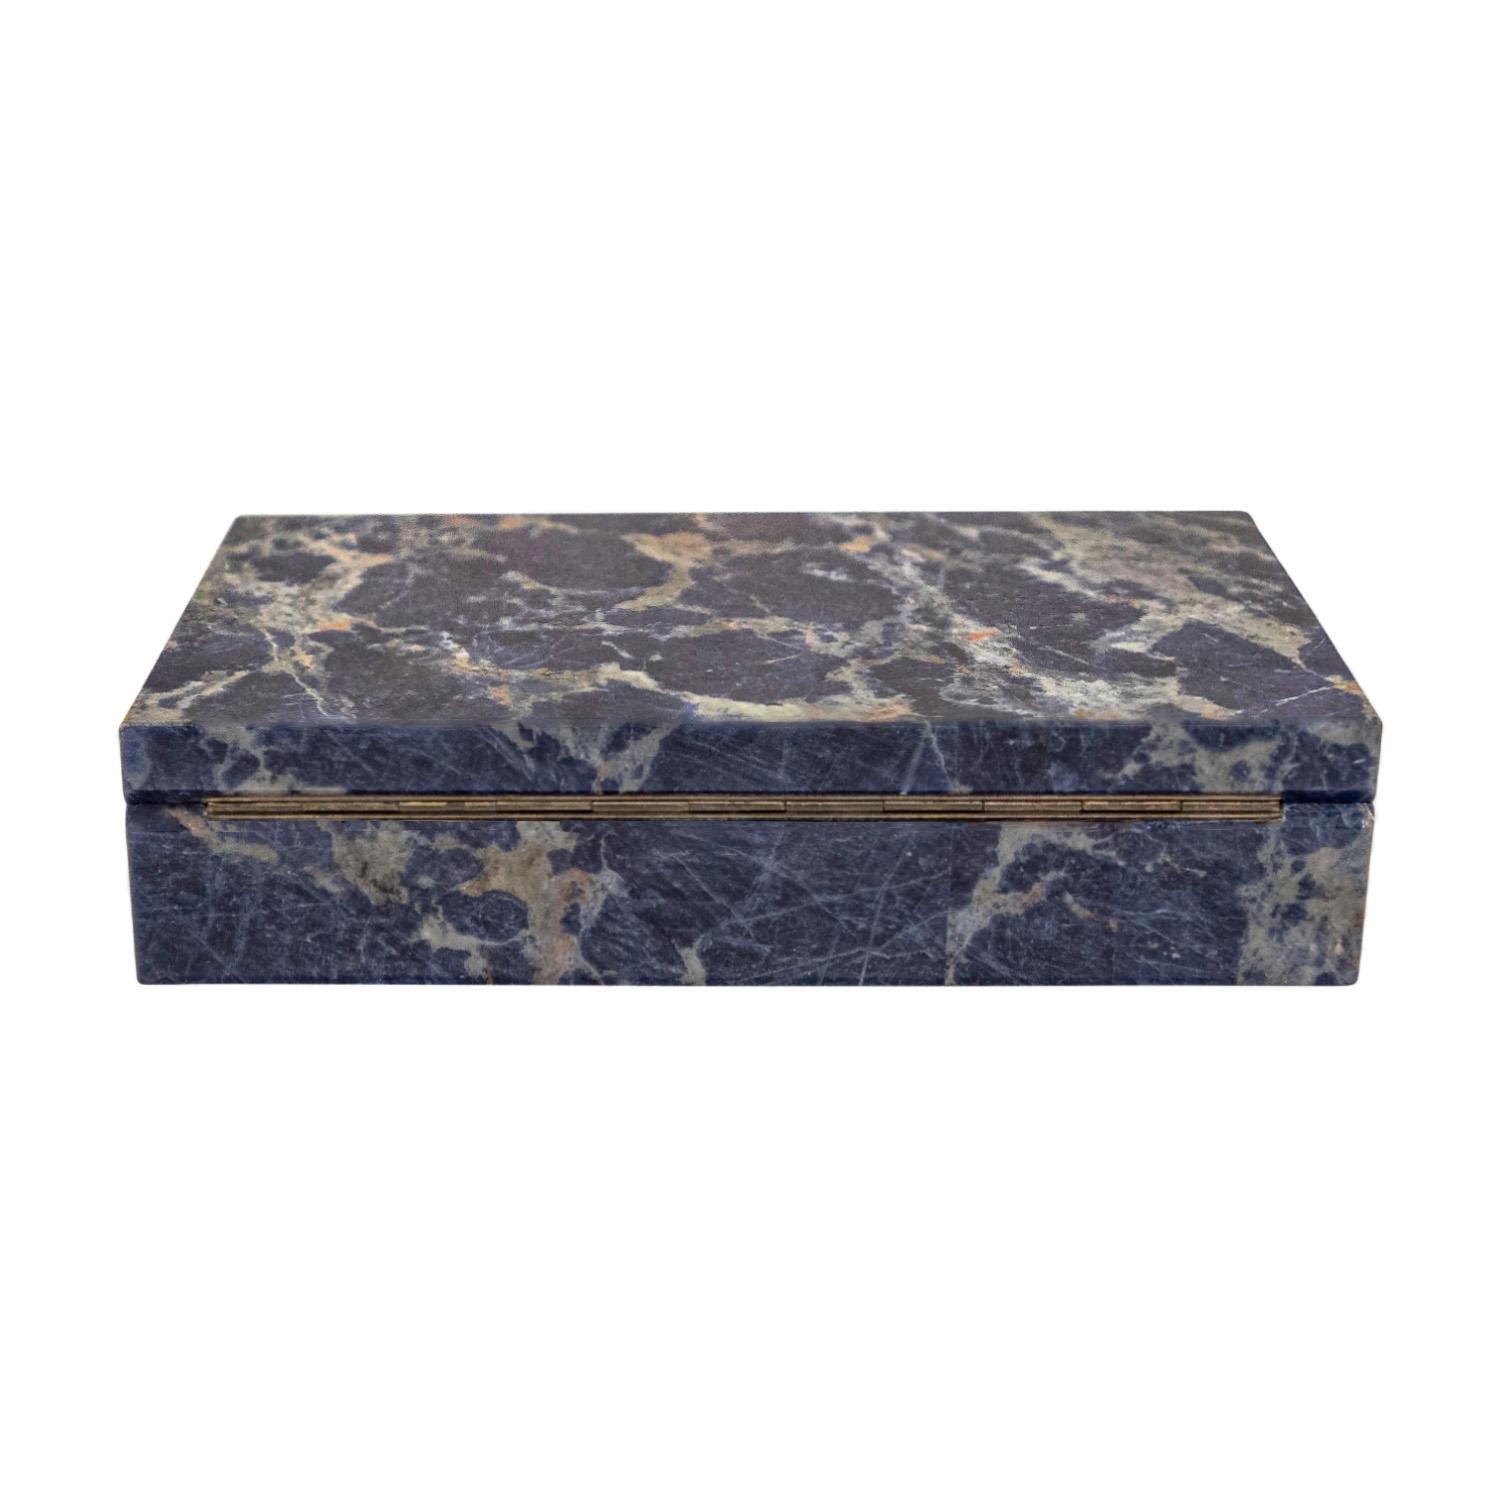 Modern Karl Springer Unique Hinged Box in Polished Sodalite Stone 1980s 'Signed' For Sale